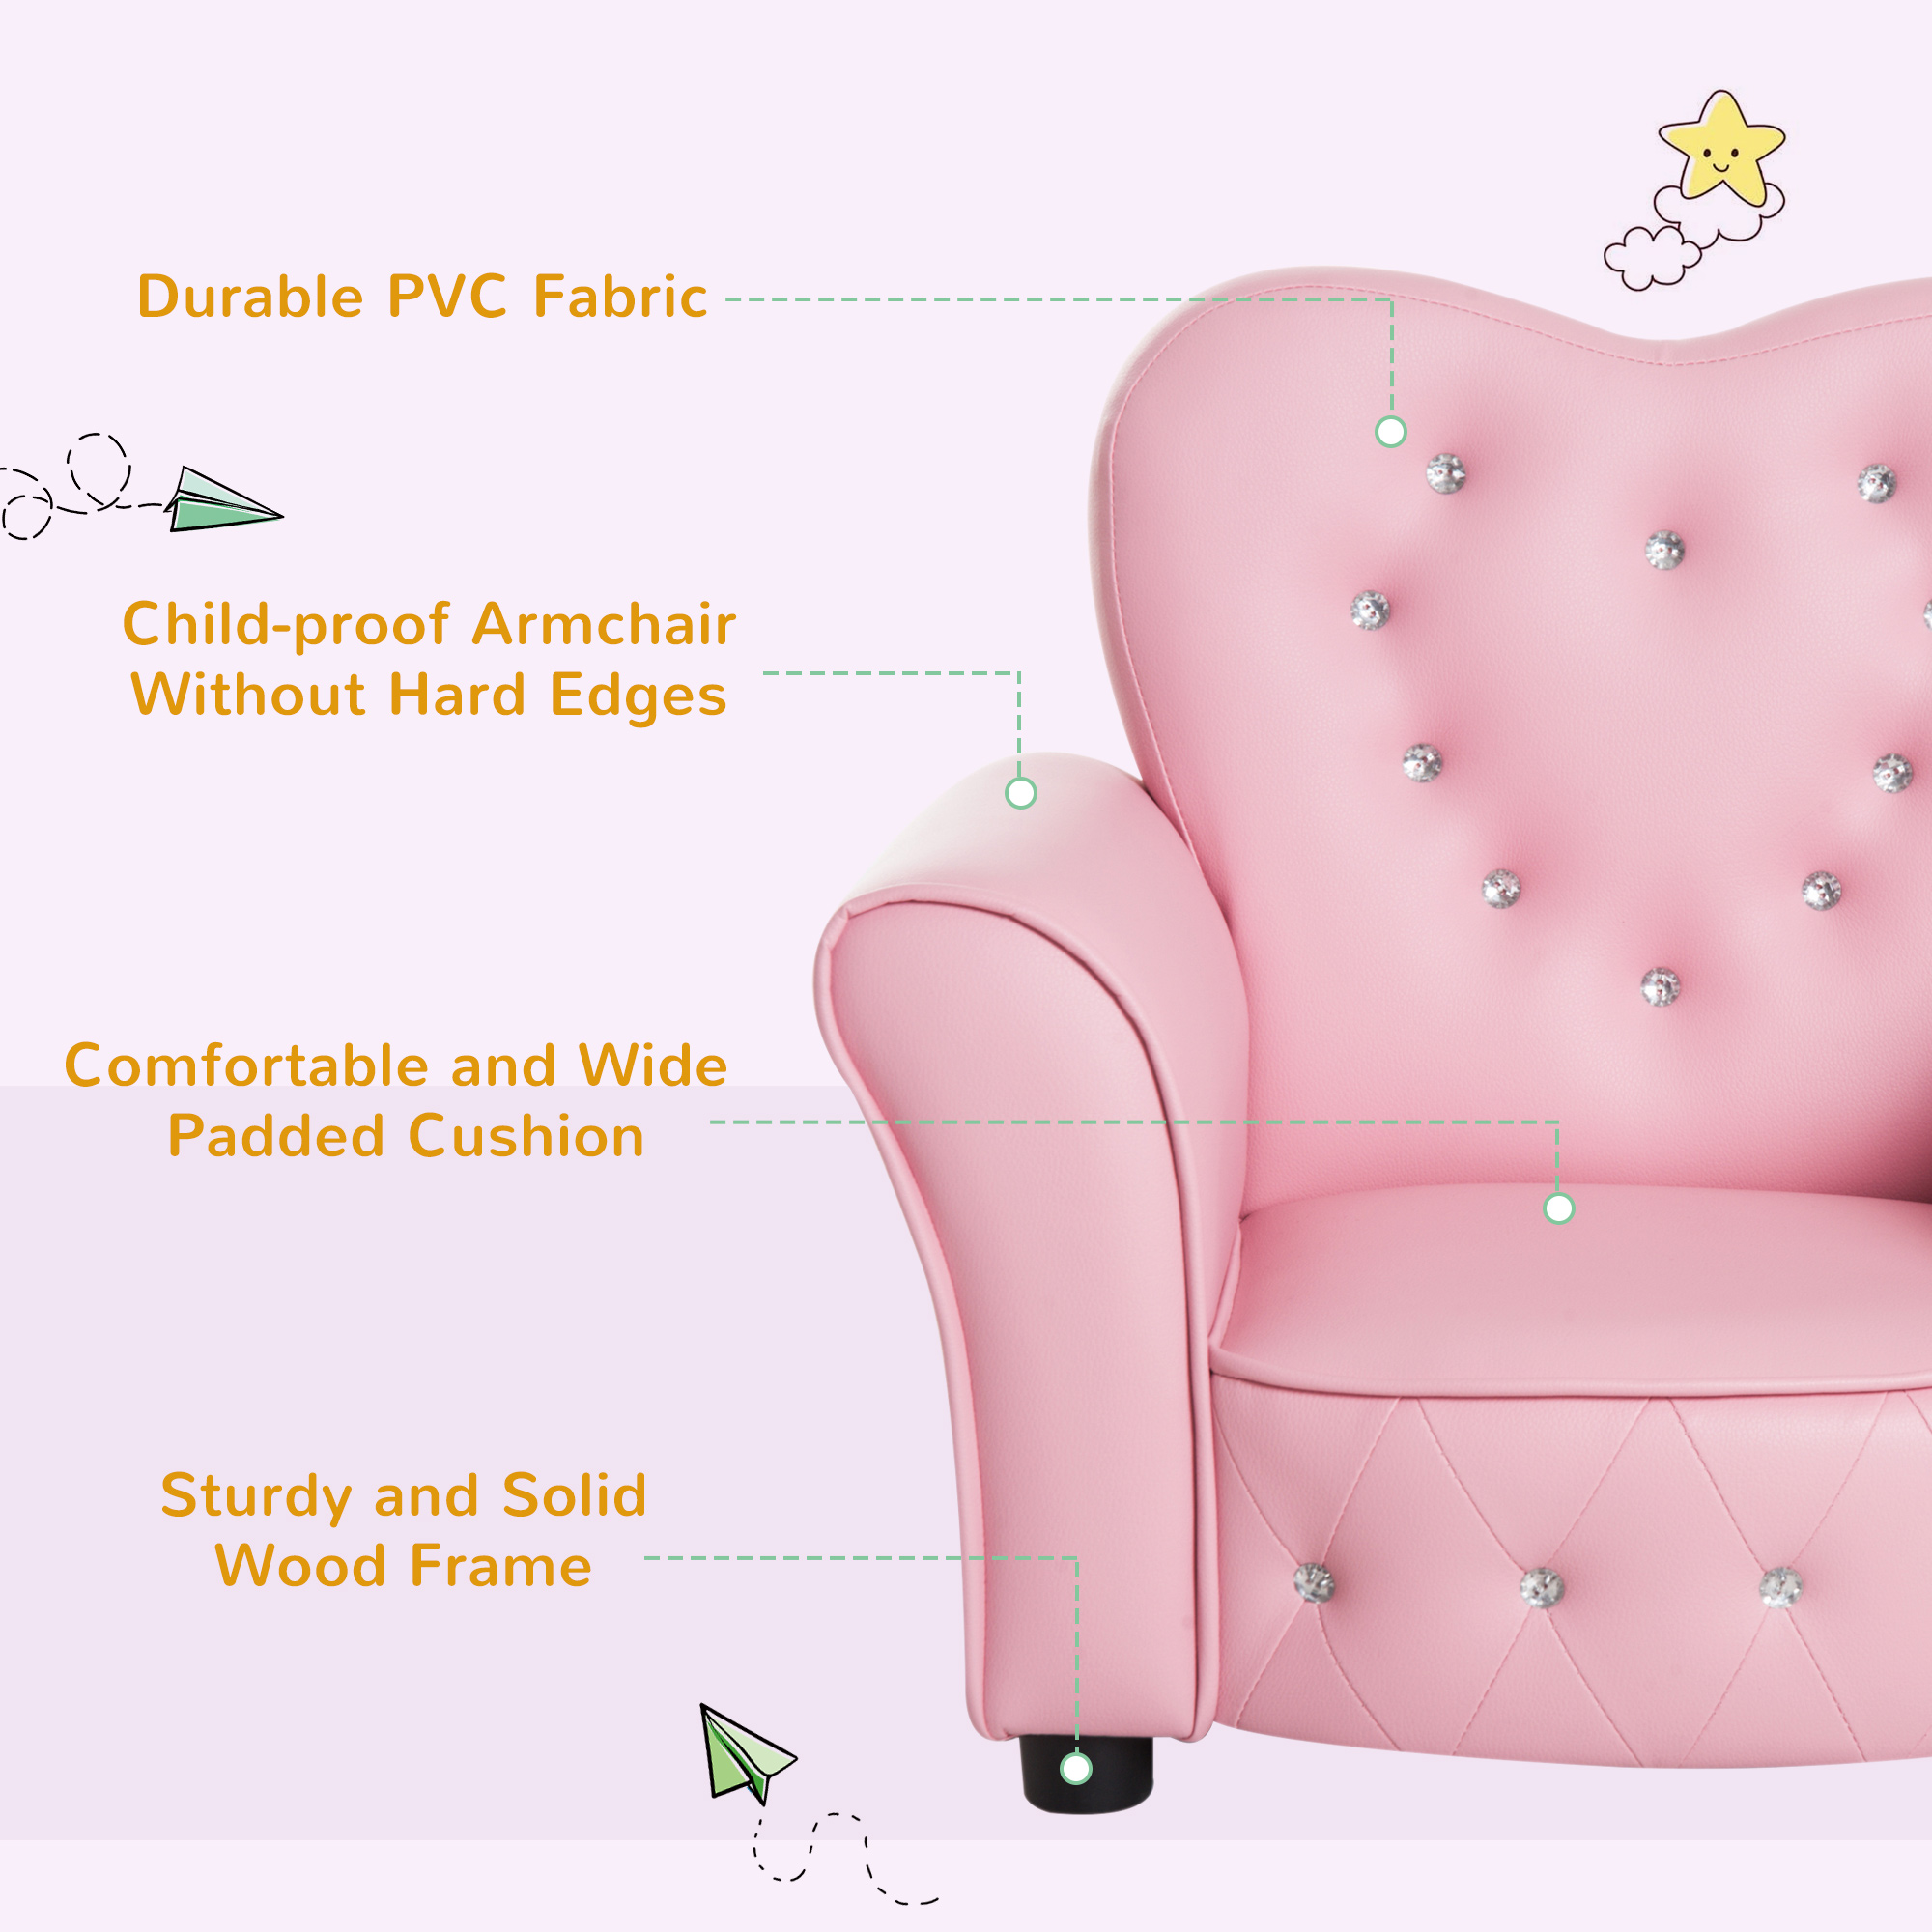 Qaba Kids Sofa Toddler Tufted Upholstered Sofa Chair Princess Couch Furniture with Diamond Decoration for Preschool Child, Pink - image 6 of 9